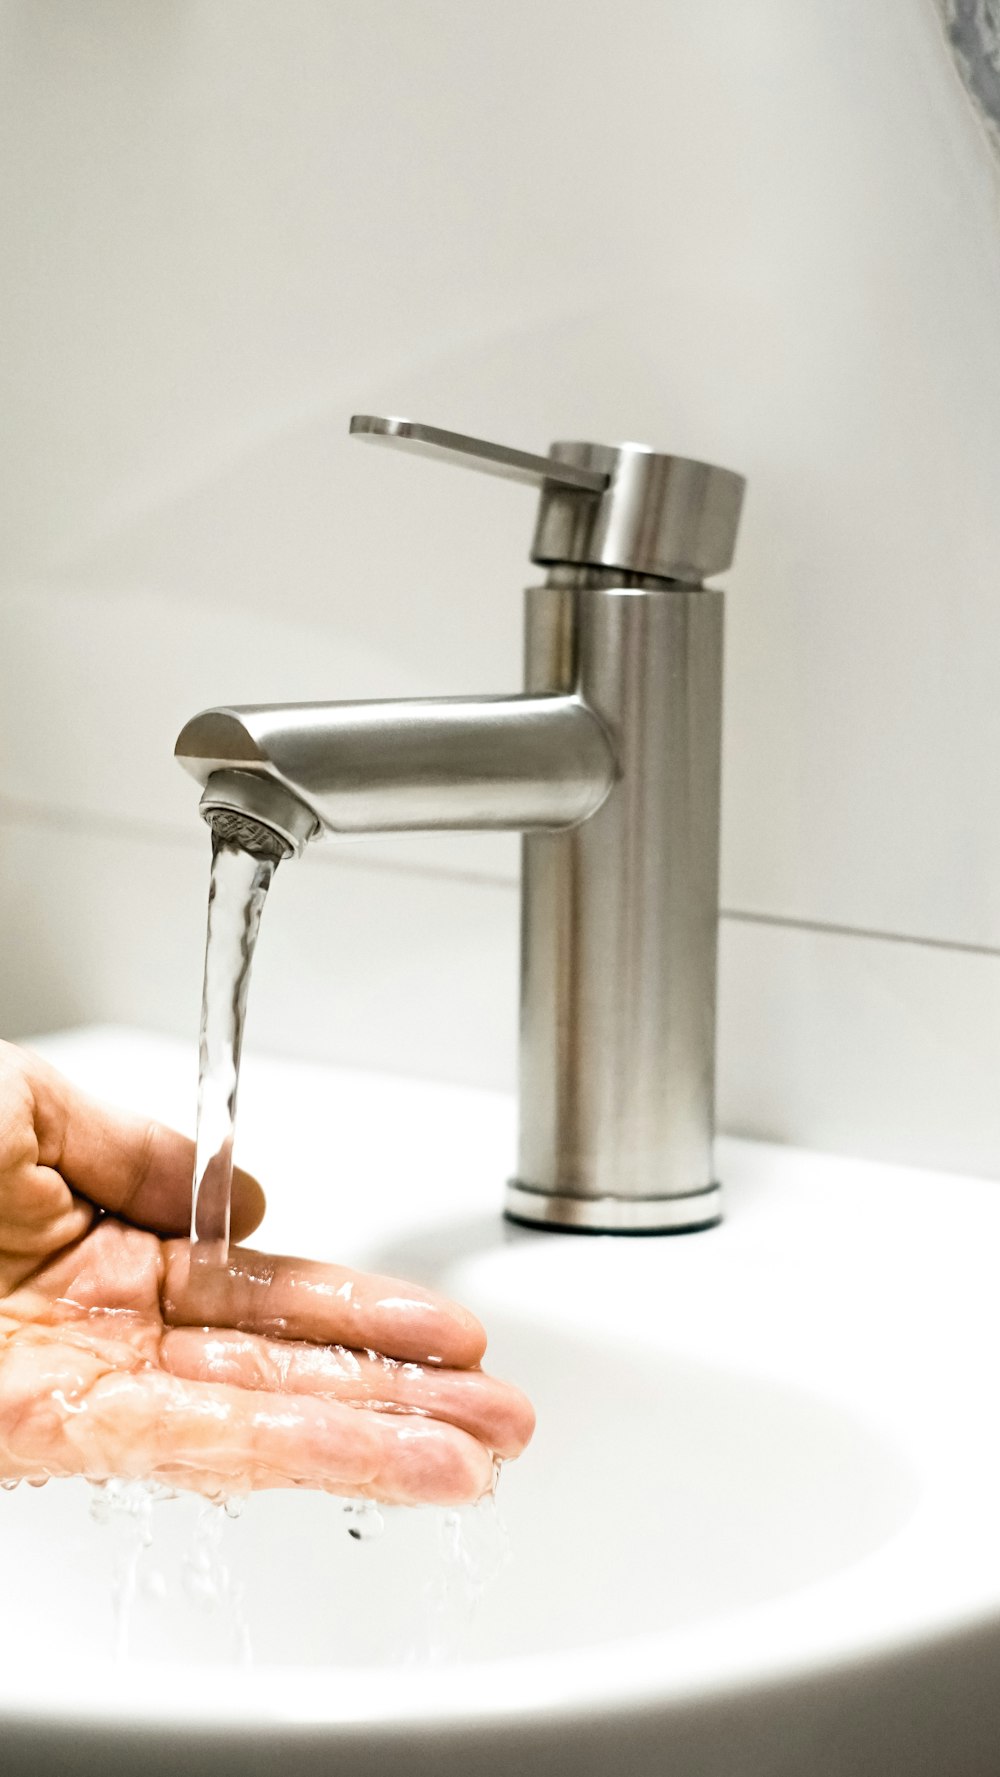 a person washing their hands under a faucet